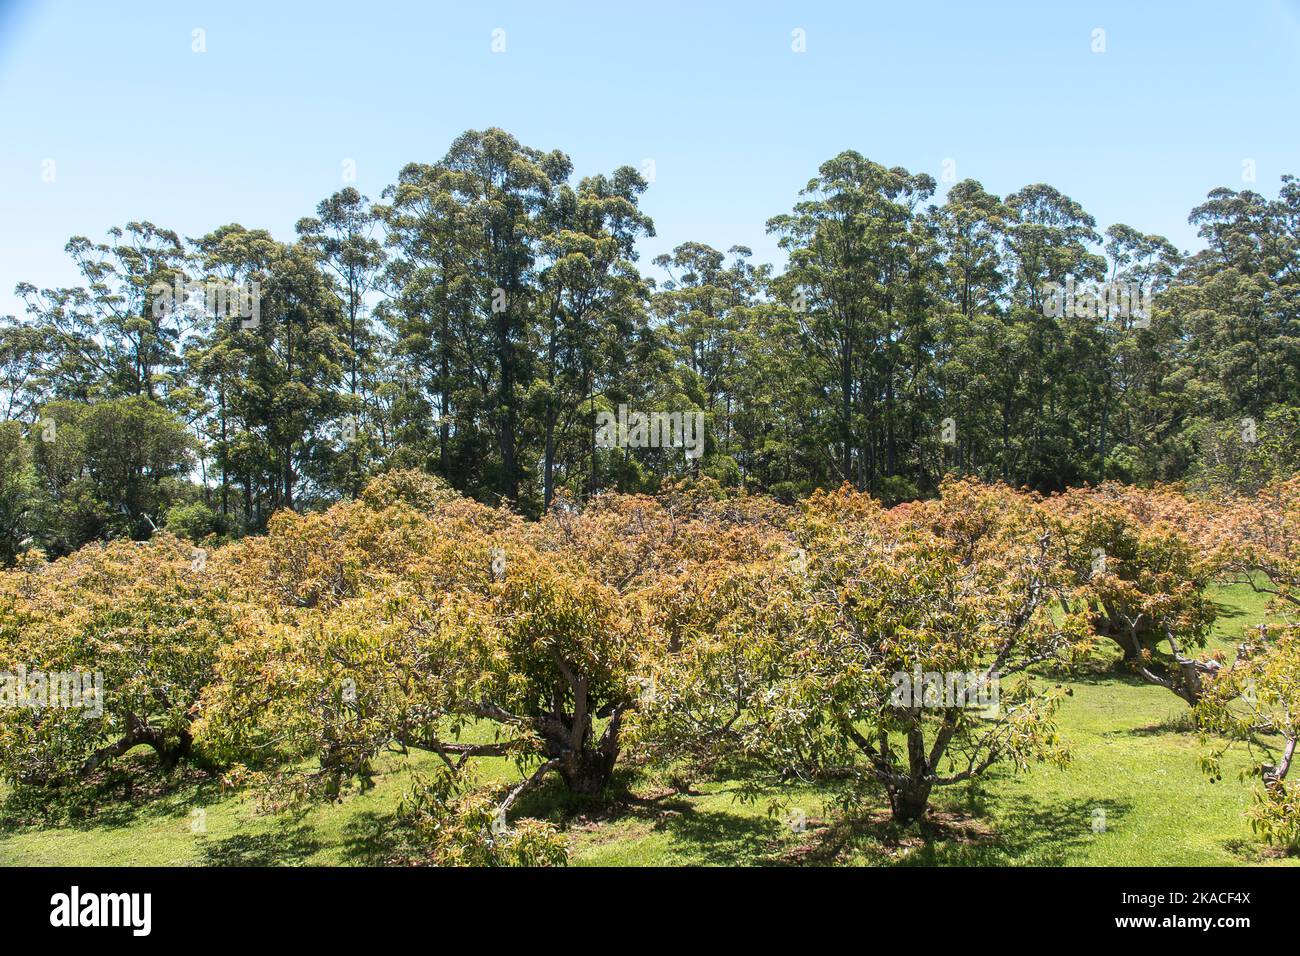 View of avocado (persea americana) orchard contrasts with tall gum trees (eucalypts grandis) on edge of subtropical rainforest. Queensland, Australia Stock Photo